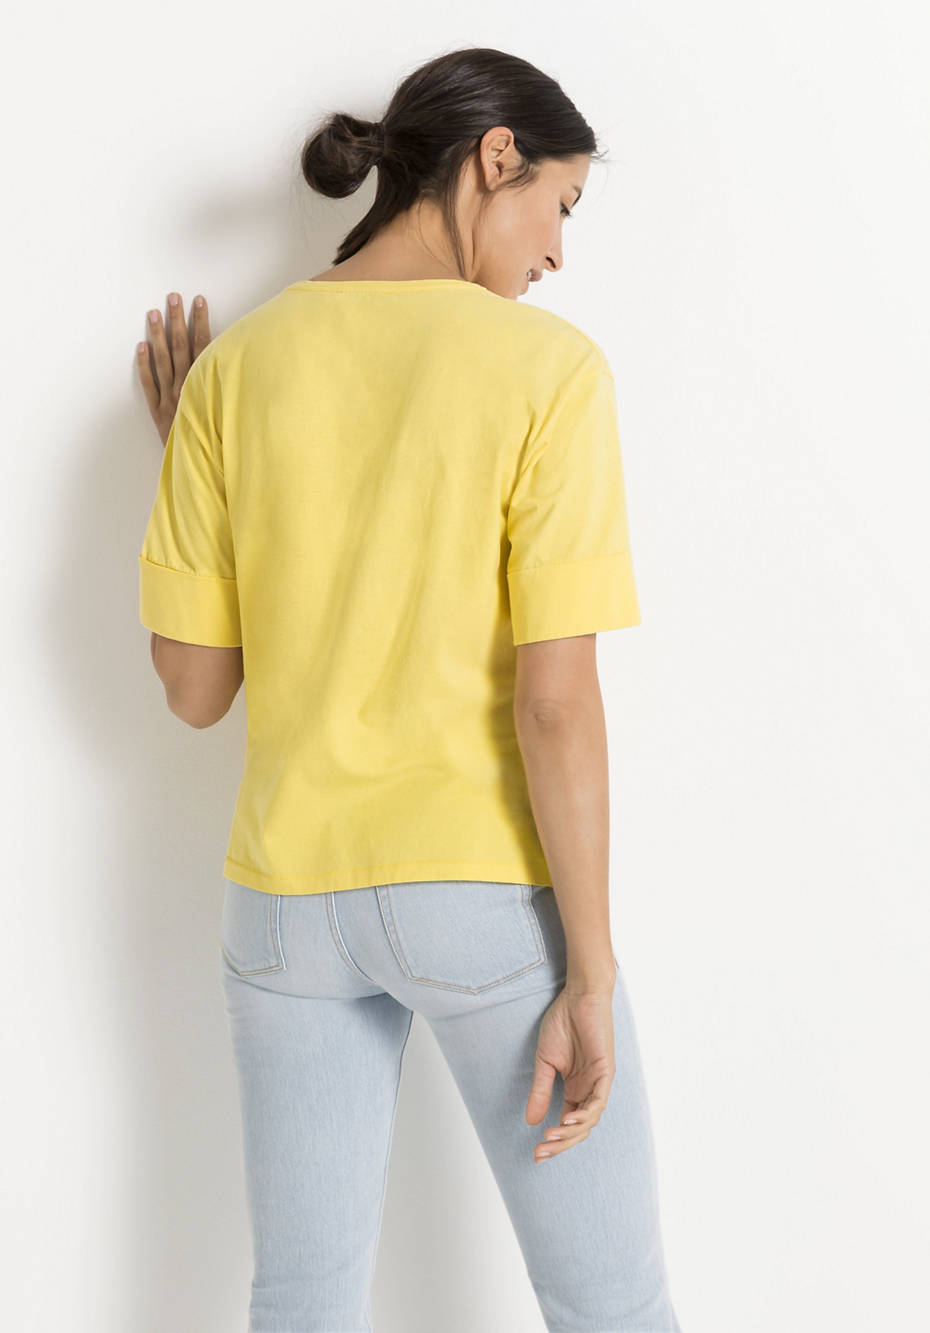 Plant-dyed shirt made of pure organic cotton